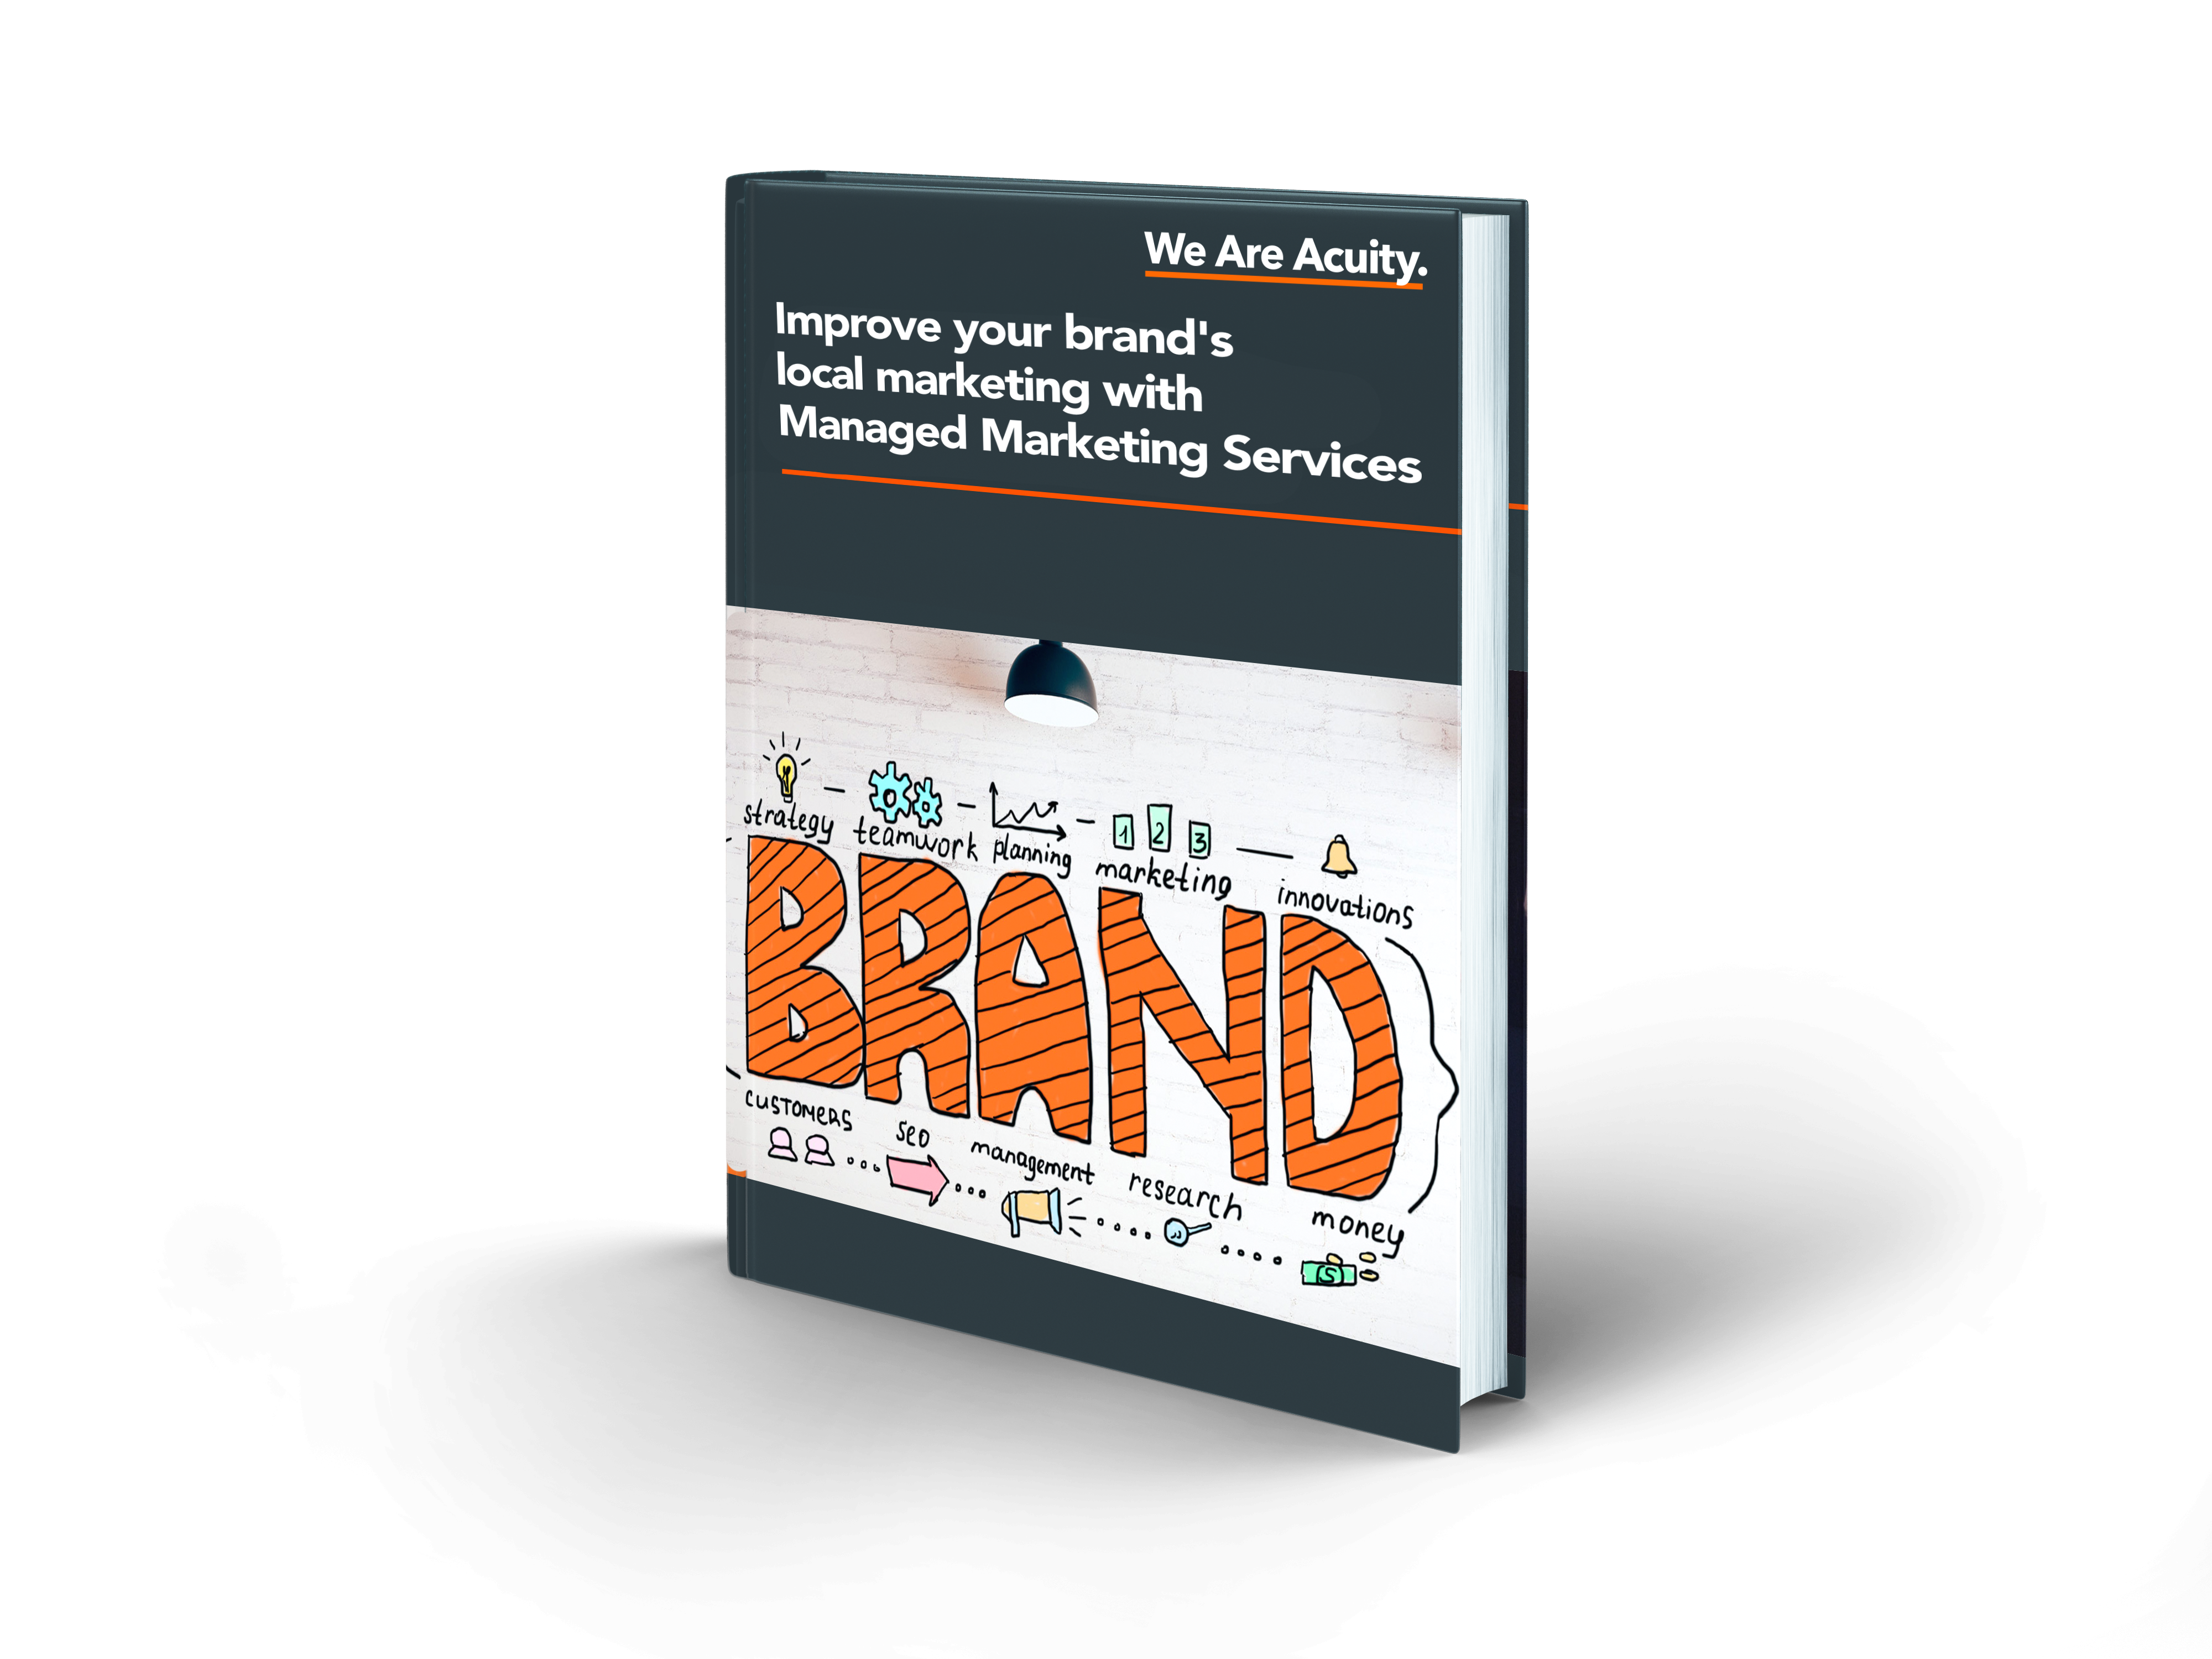 ACU13132 5. eBook - Improve your brands local marketing with Managed Marketing Services-Cover